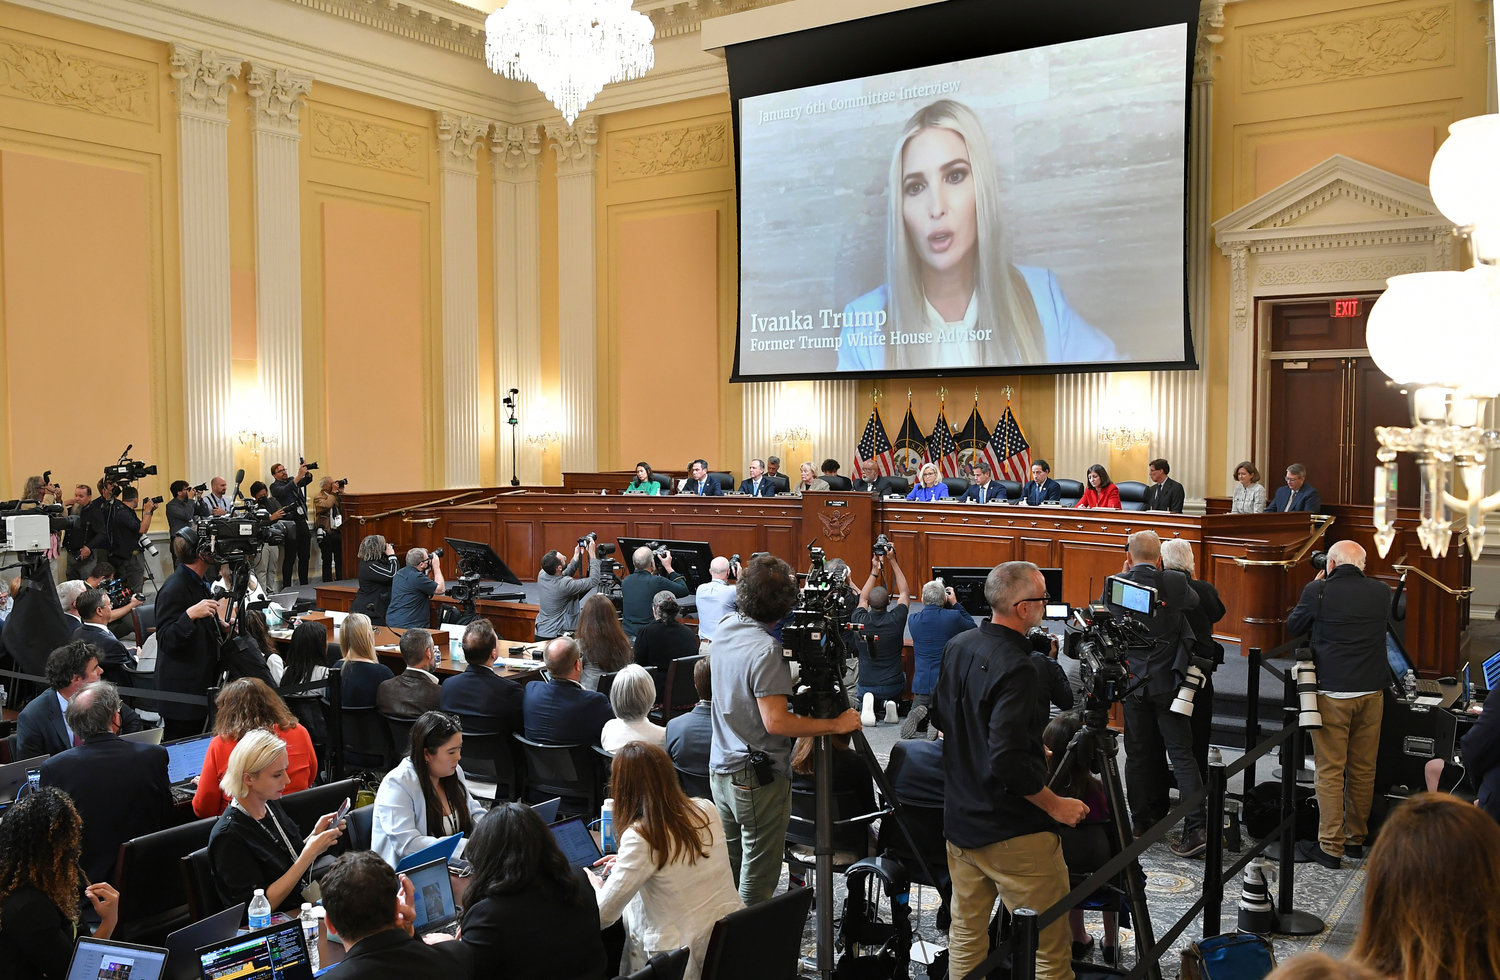 An image of Ivanka Trump is displayed on a screen as the House select committee investigating the Jan. 6 attack on the U.S. Capitol holds its first public hearing to reveal the findings of a year-long investigation, on Capitol Hill in Washington, Thursday, June 9, 2022. (Mandel Ngan/Pool via AP)